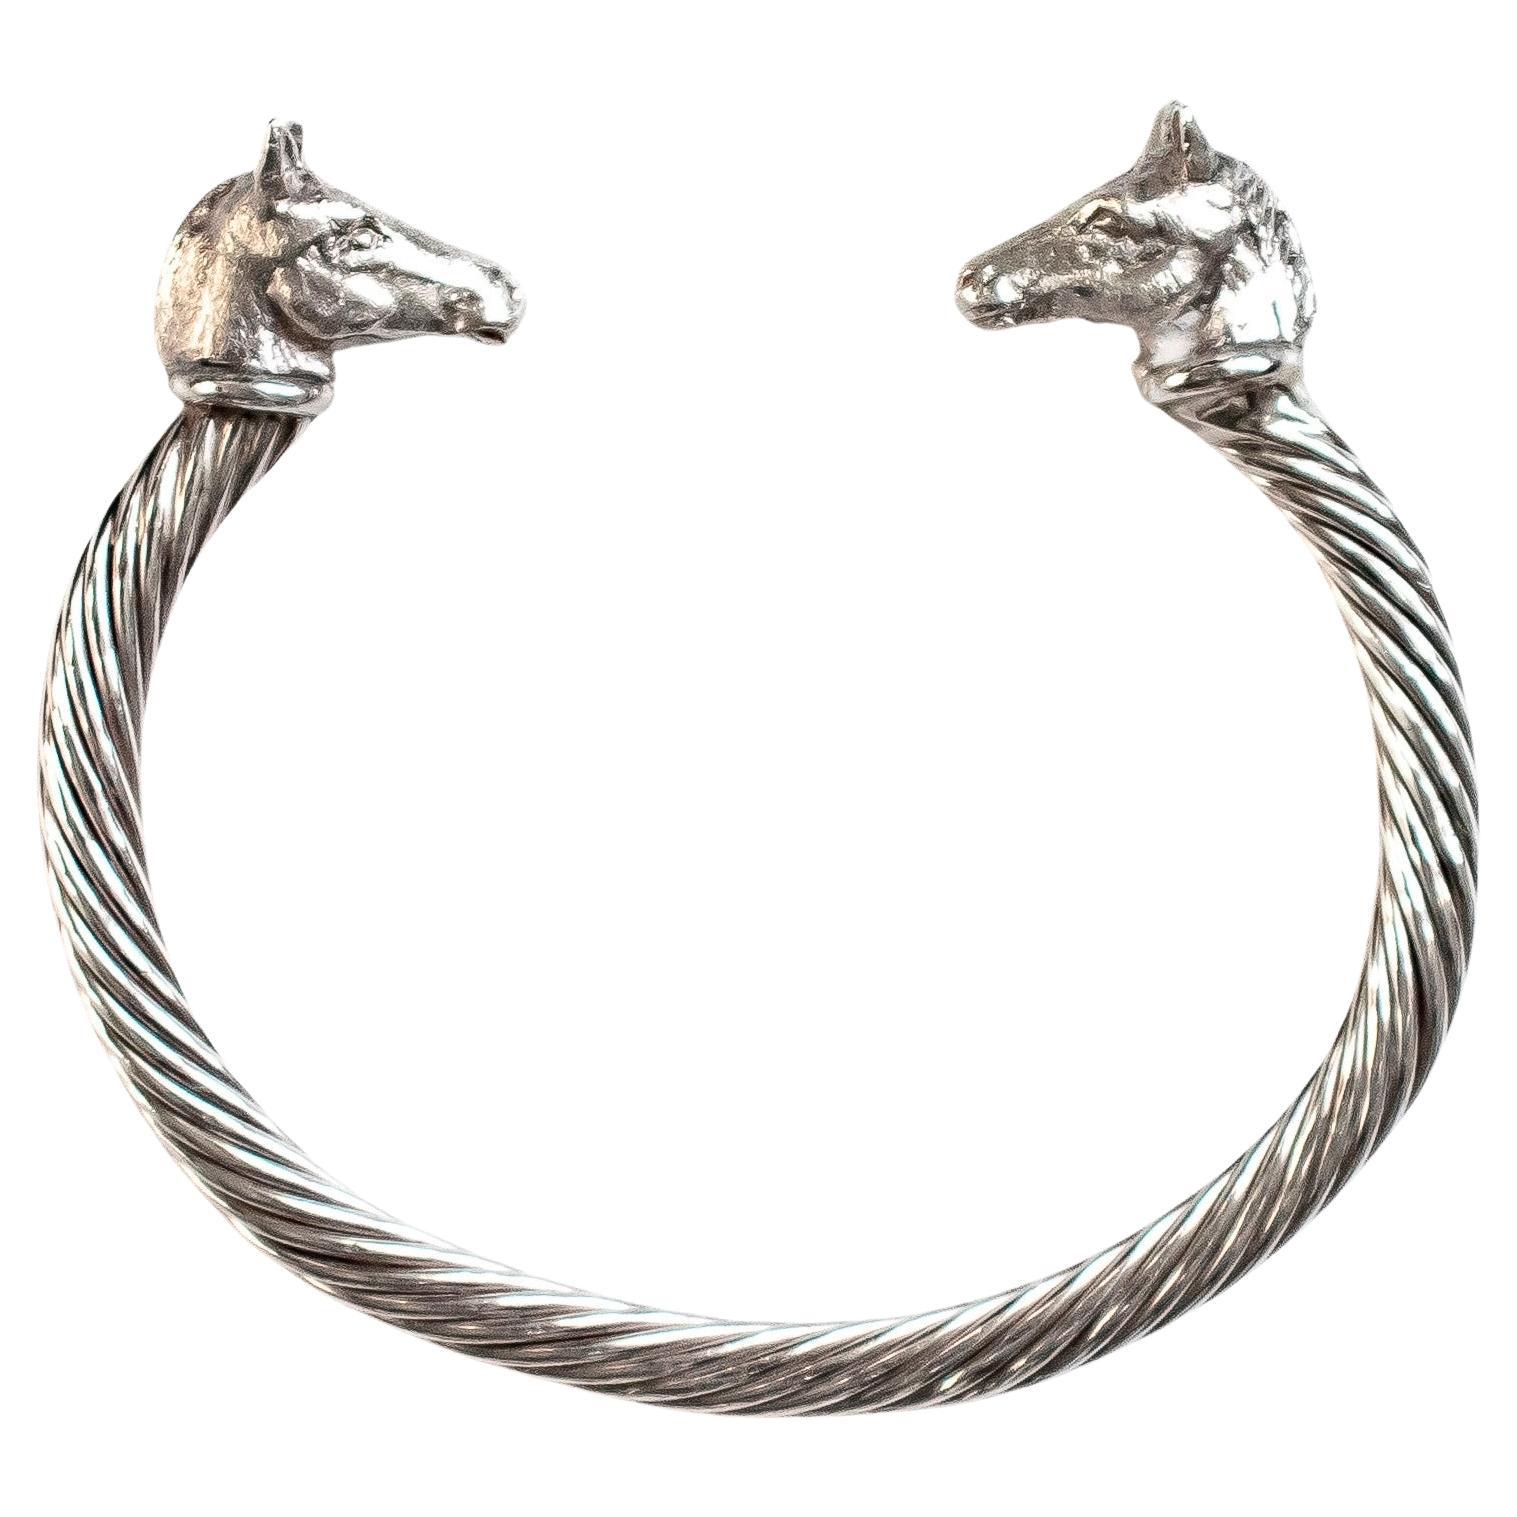 Paul Eaton Sculpted Pony Heads on Sterling Silver Twisted Bangle Bracelet